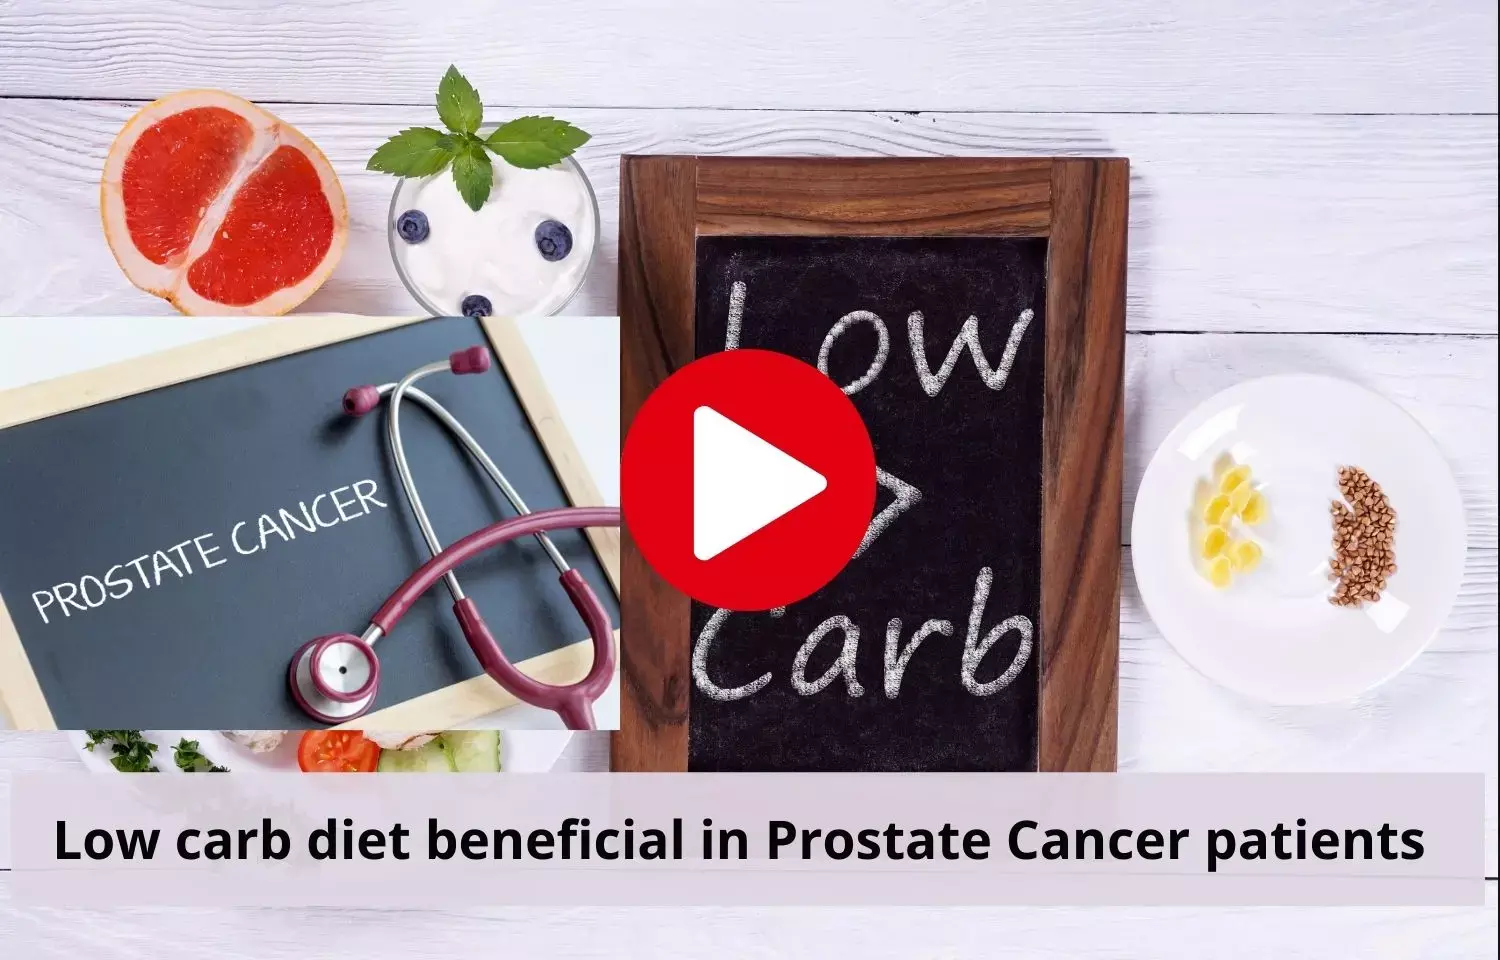 Prostate cancer patients benefited by low carb diet